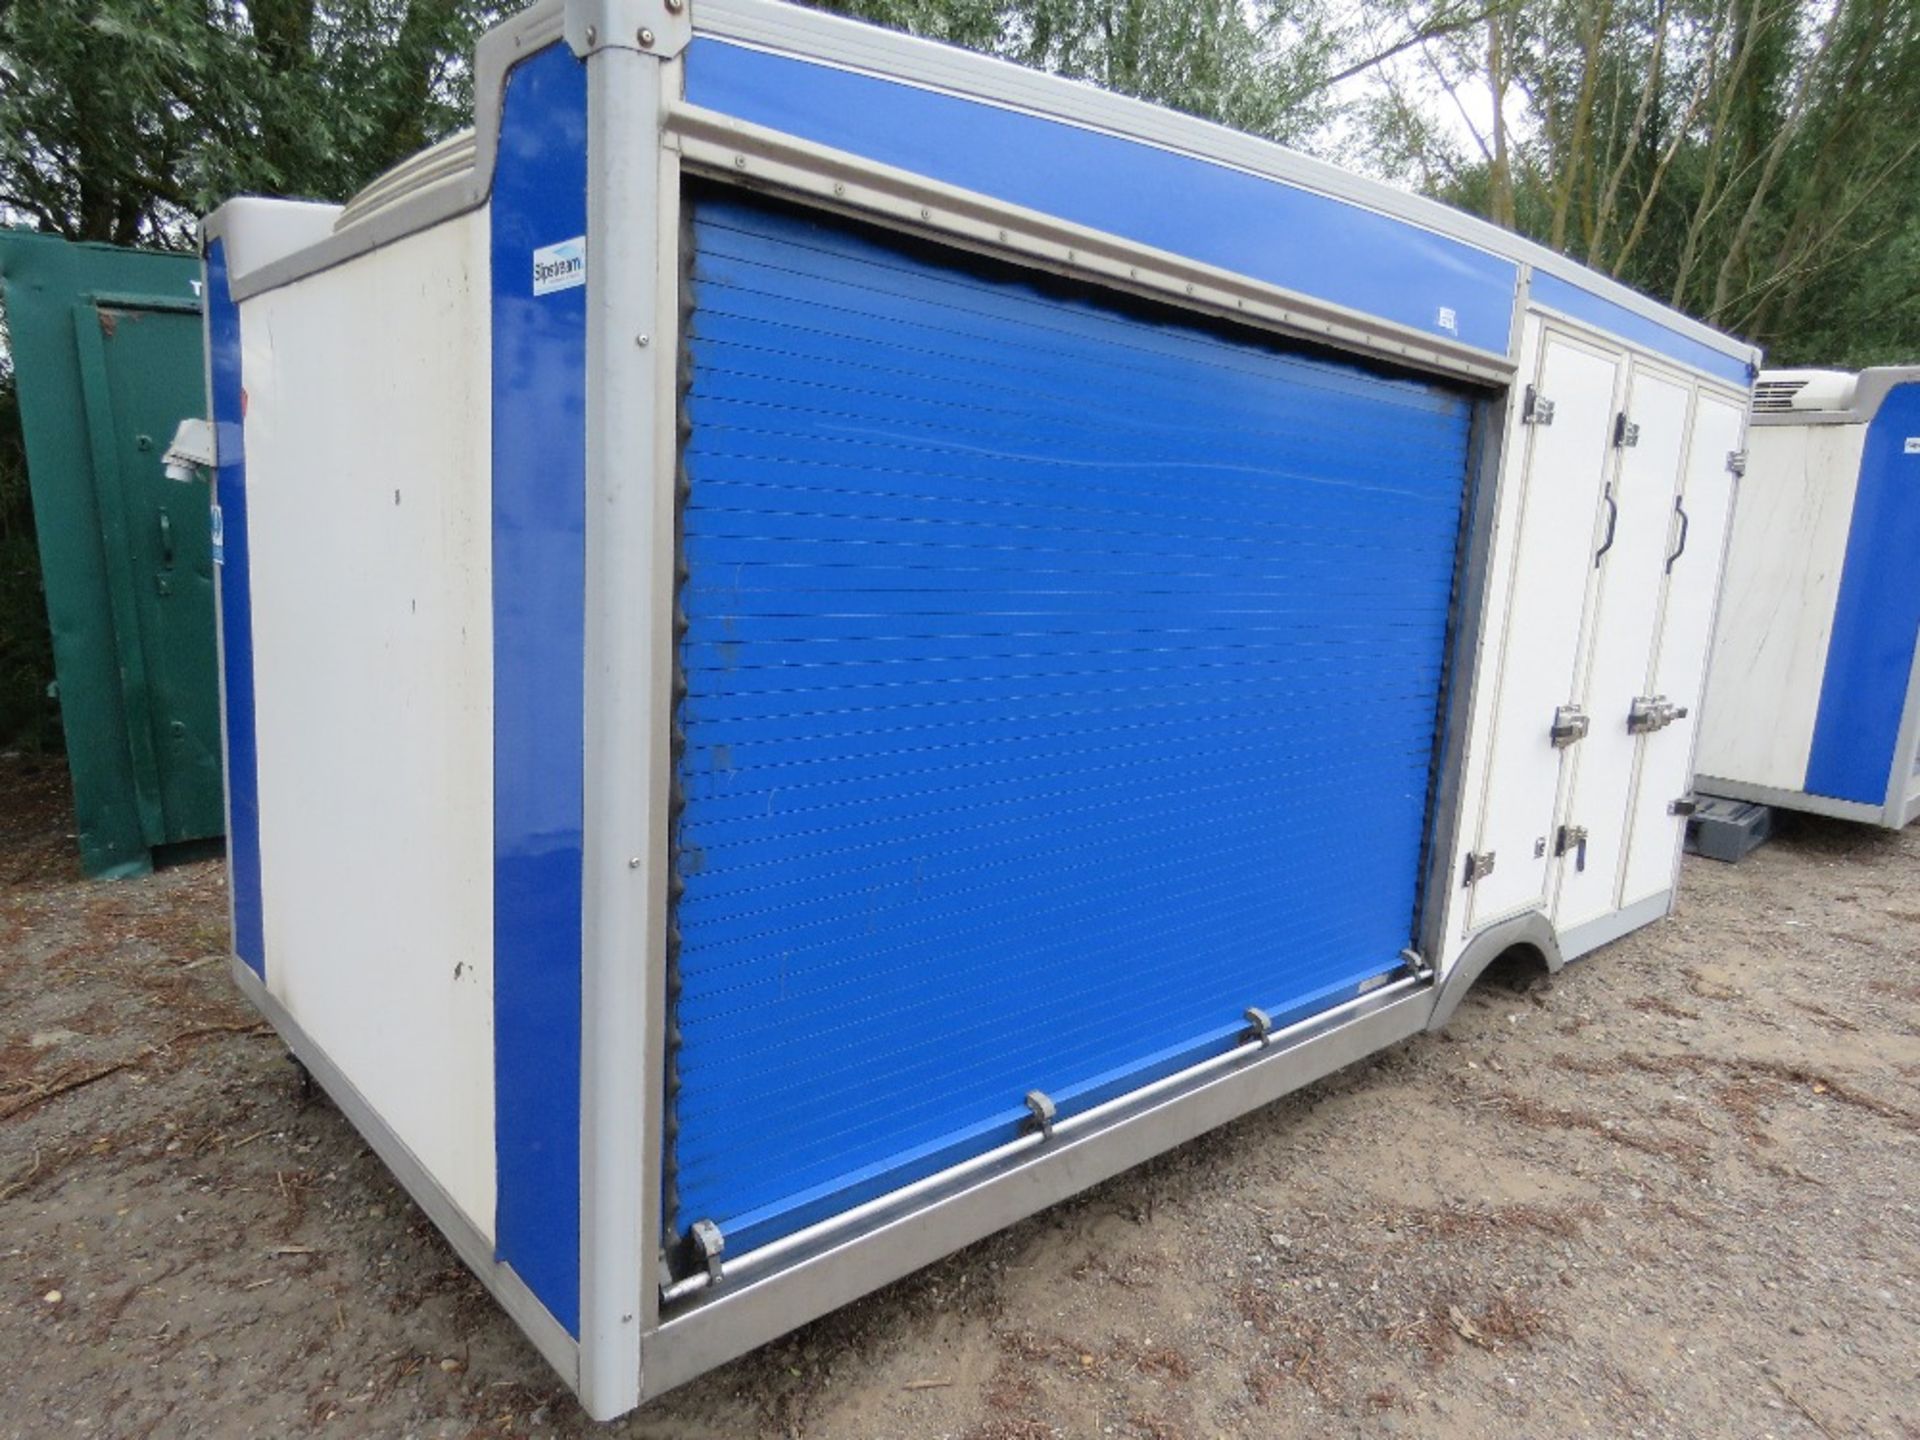 TEMPERATURE CONTROLLED VAN BODY WITH ROLLER SHUTTER SIDES, 13FT LENGTH APPROX.